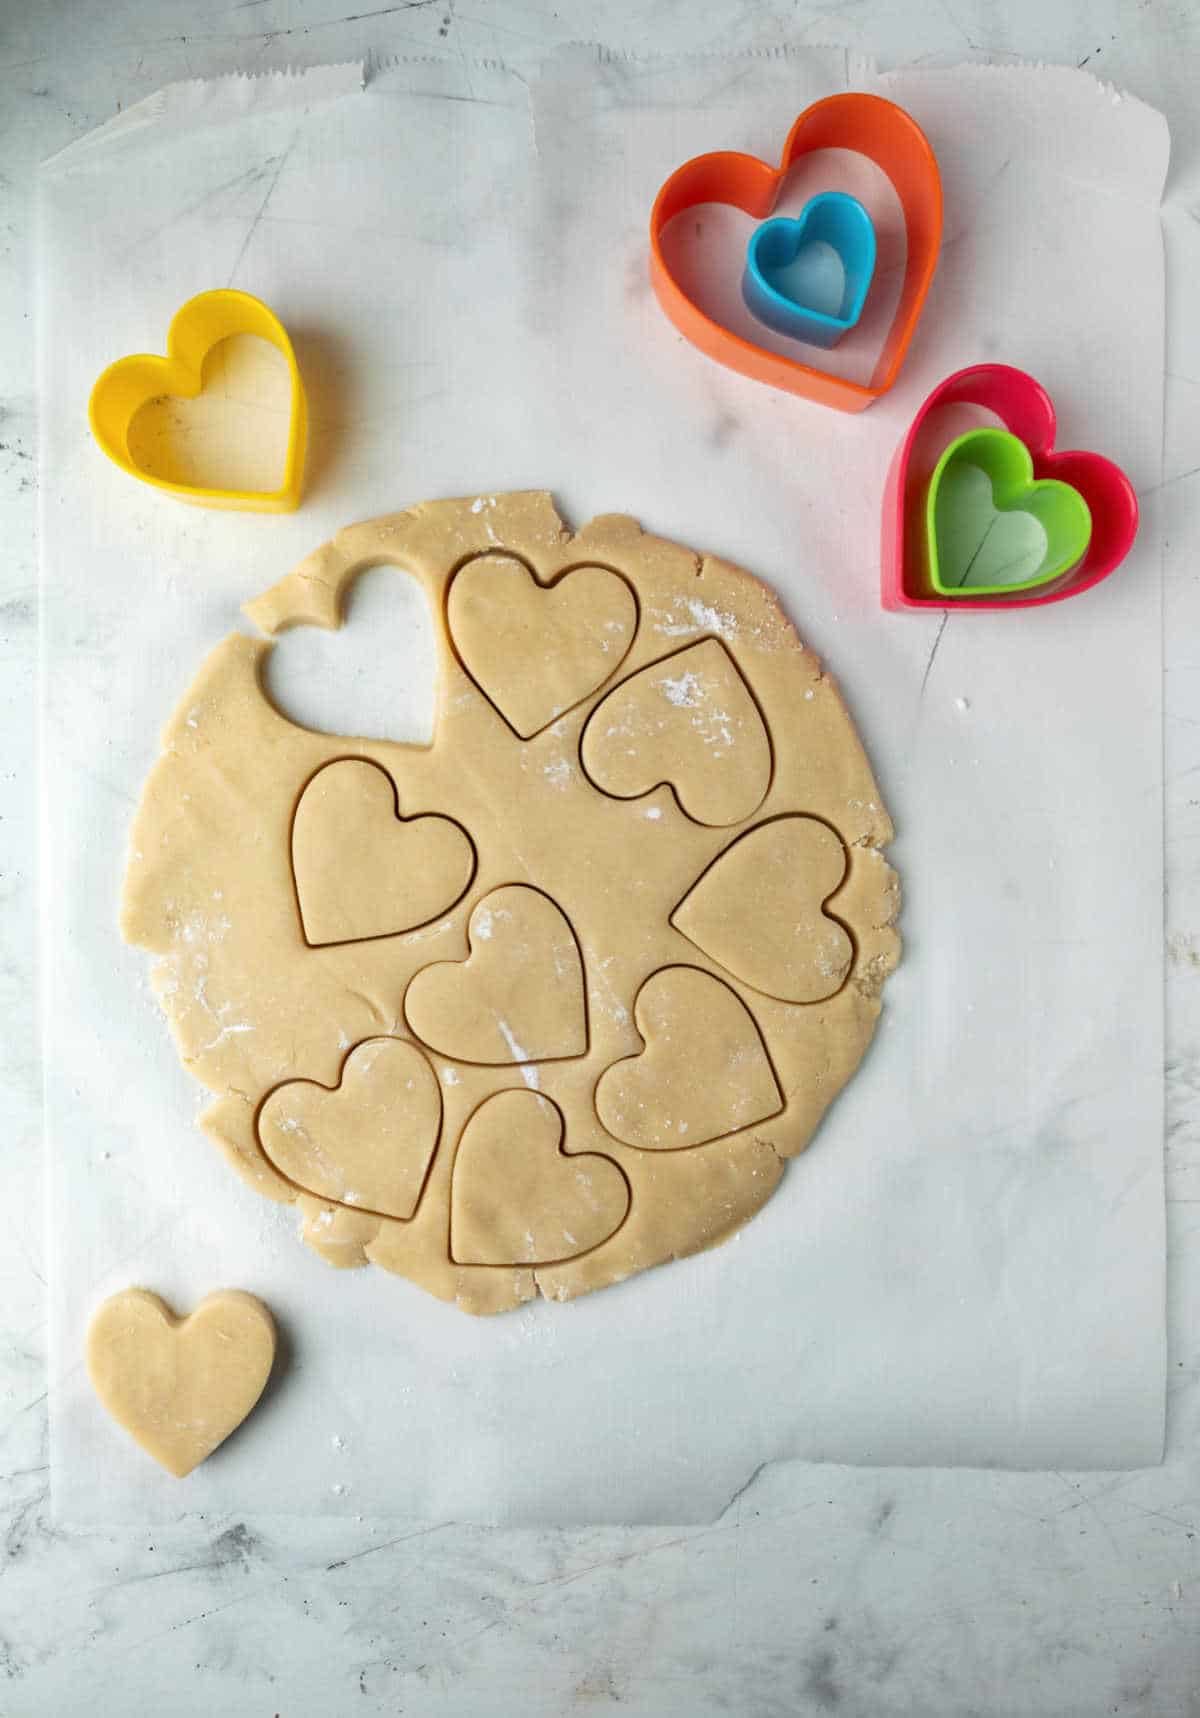 Dough with heart shaped cut outs in it. 